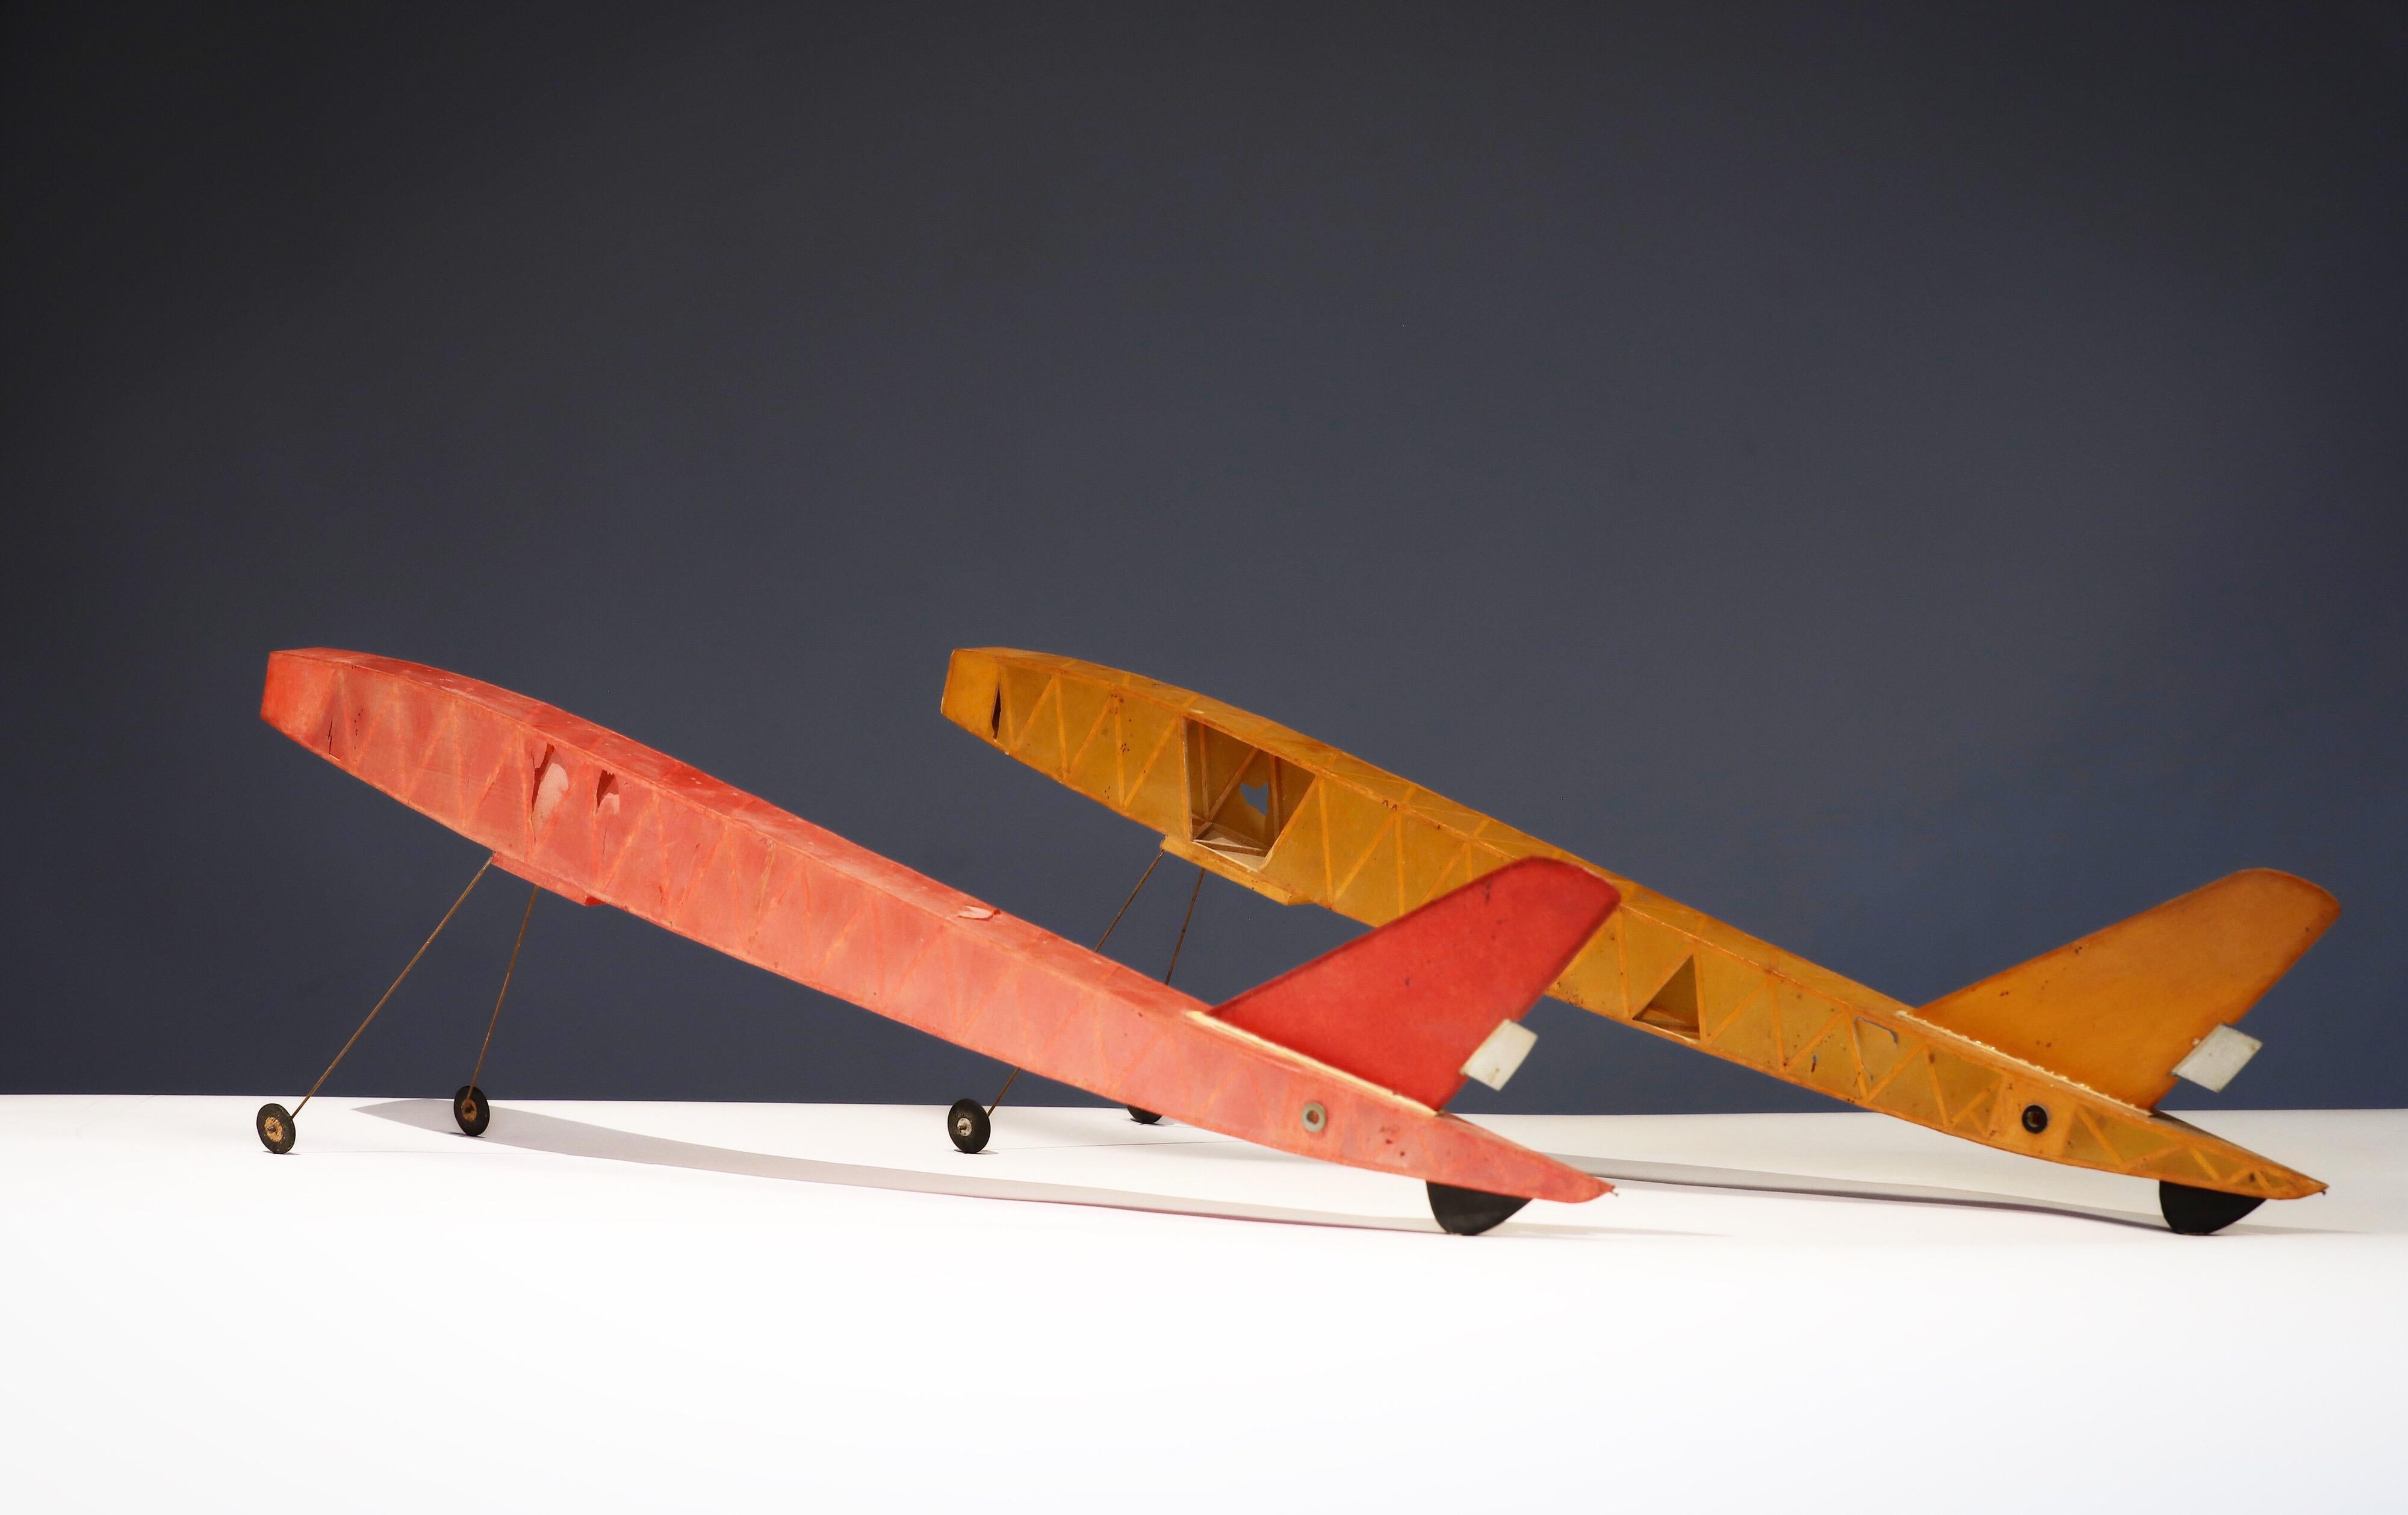 Vintage paper wrapped balsa wood plane bodies. Both with a wonderful aged patina and imperfections. Perfect in a whimsical design, child's room or any serious aviation designed space.